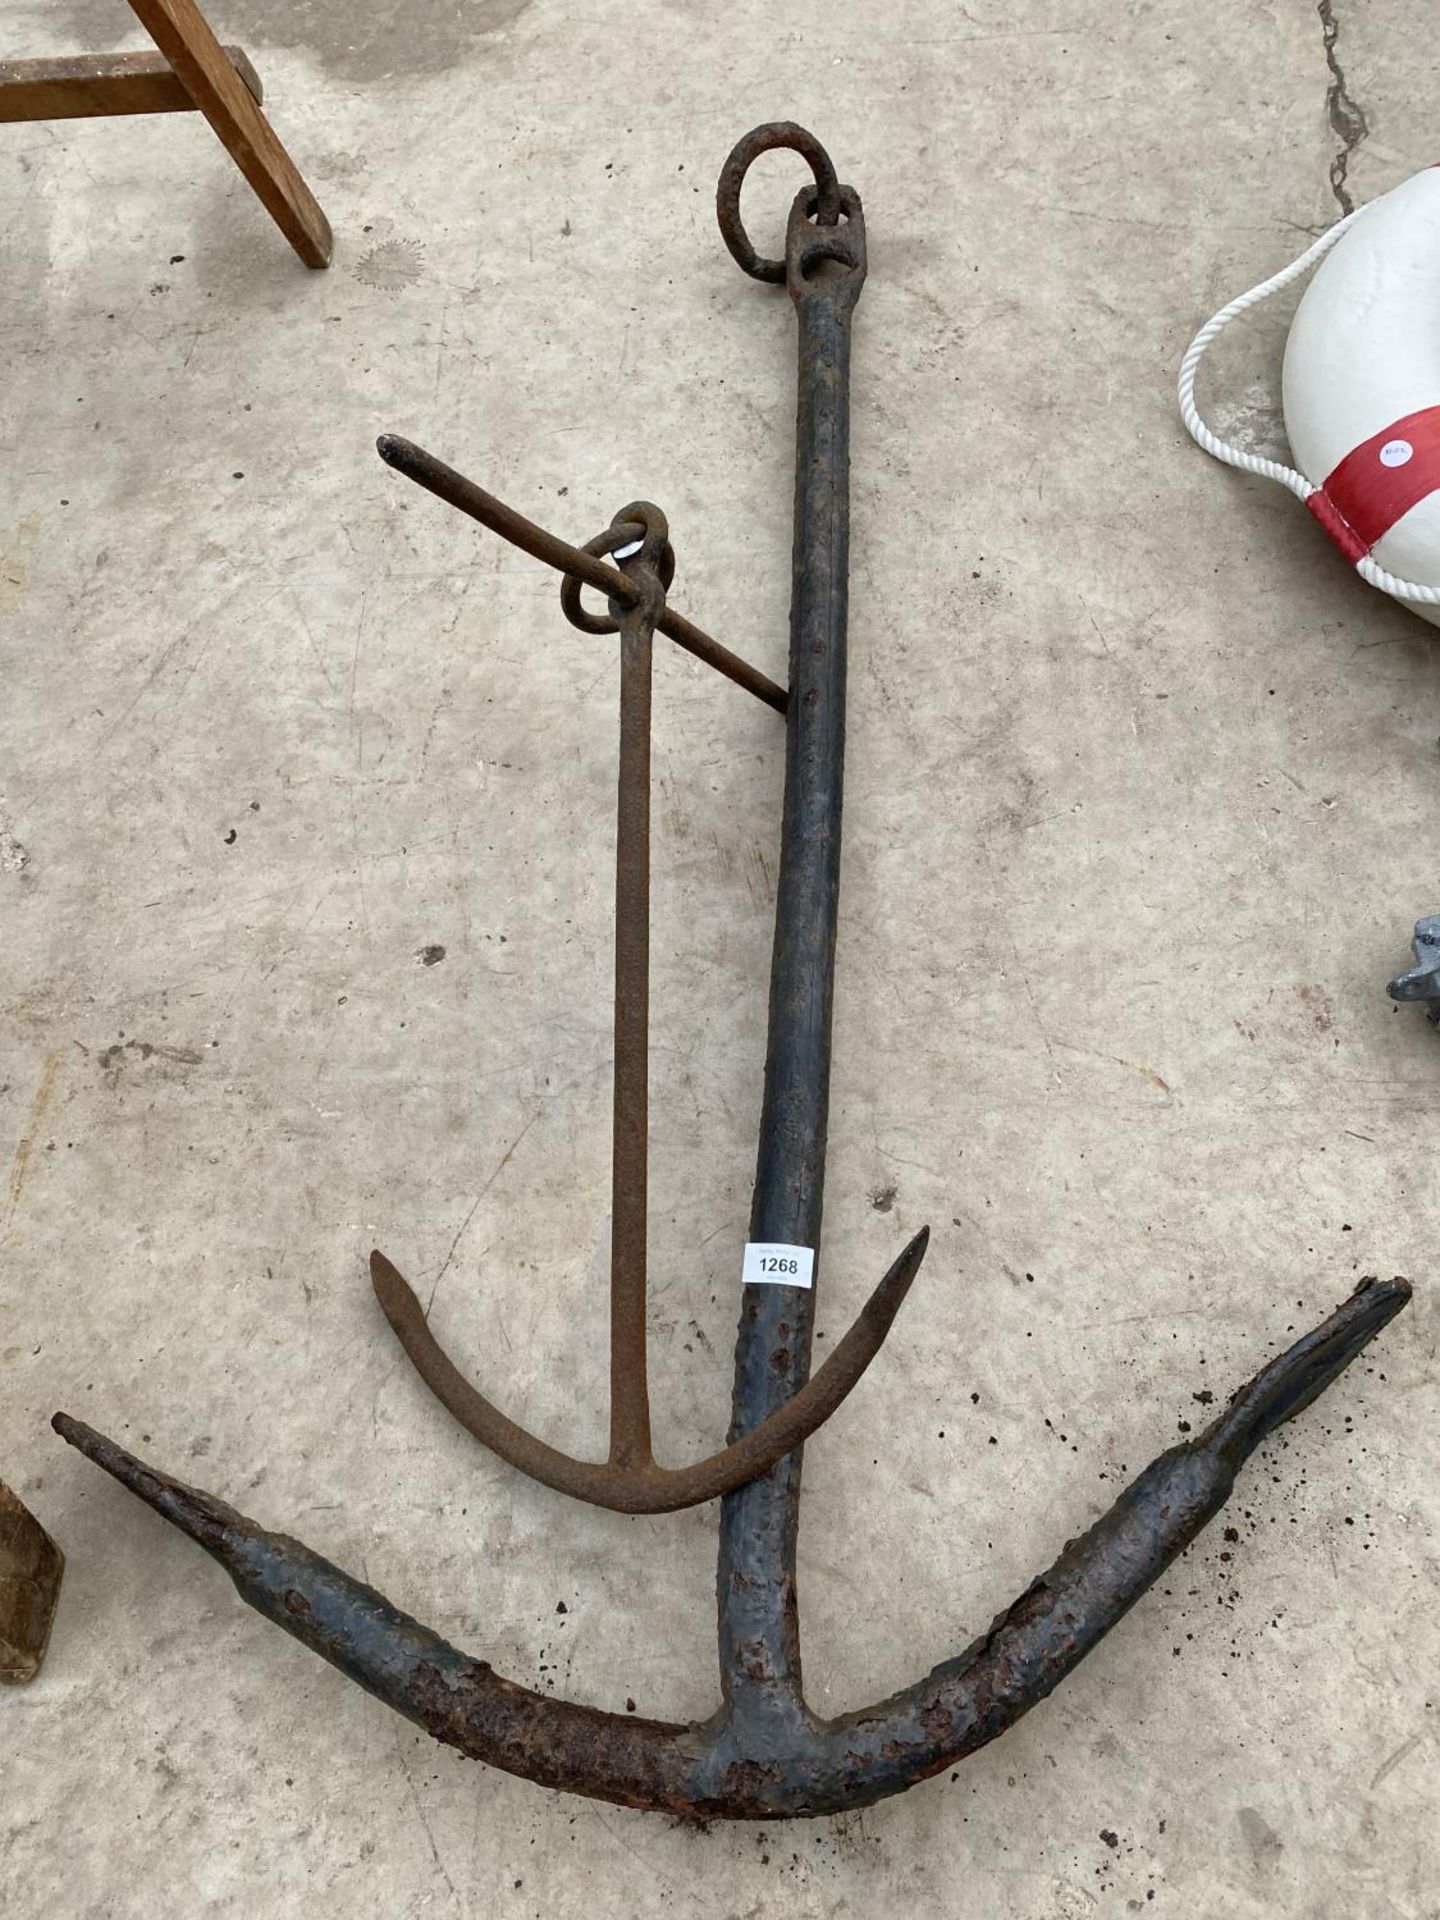 TWO VINTAGE METAL SHIPS ANCHORS